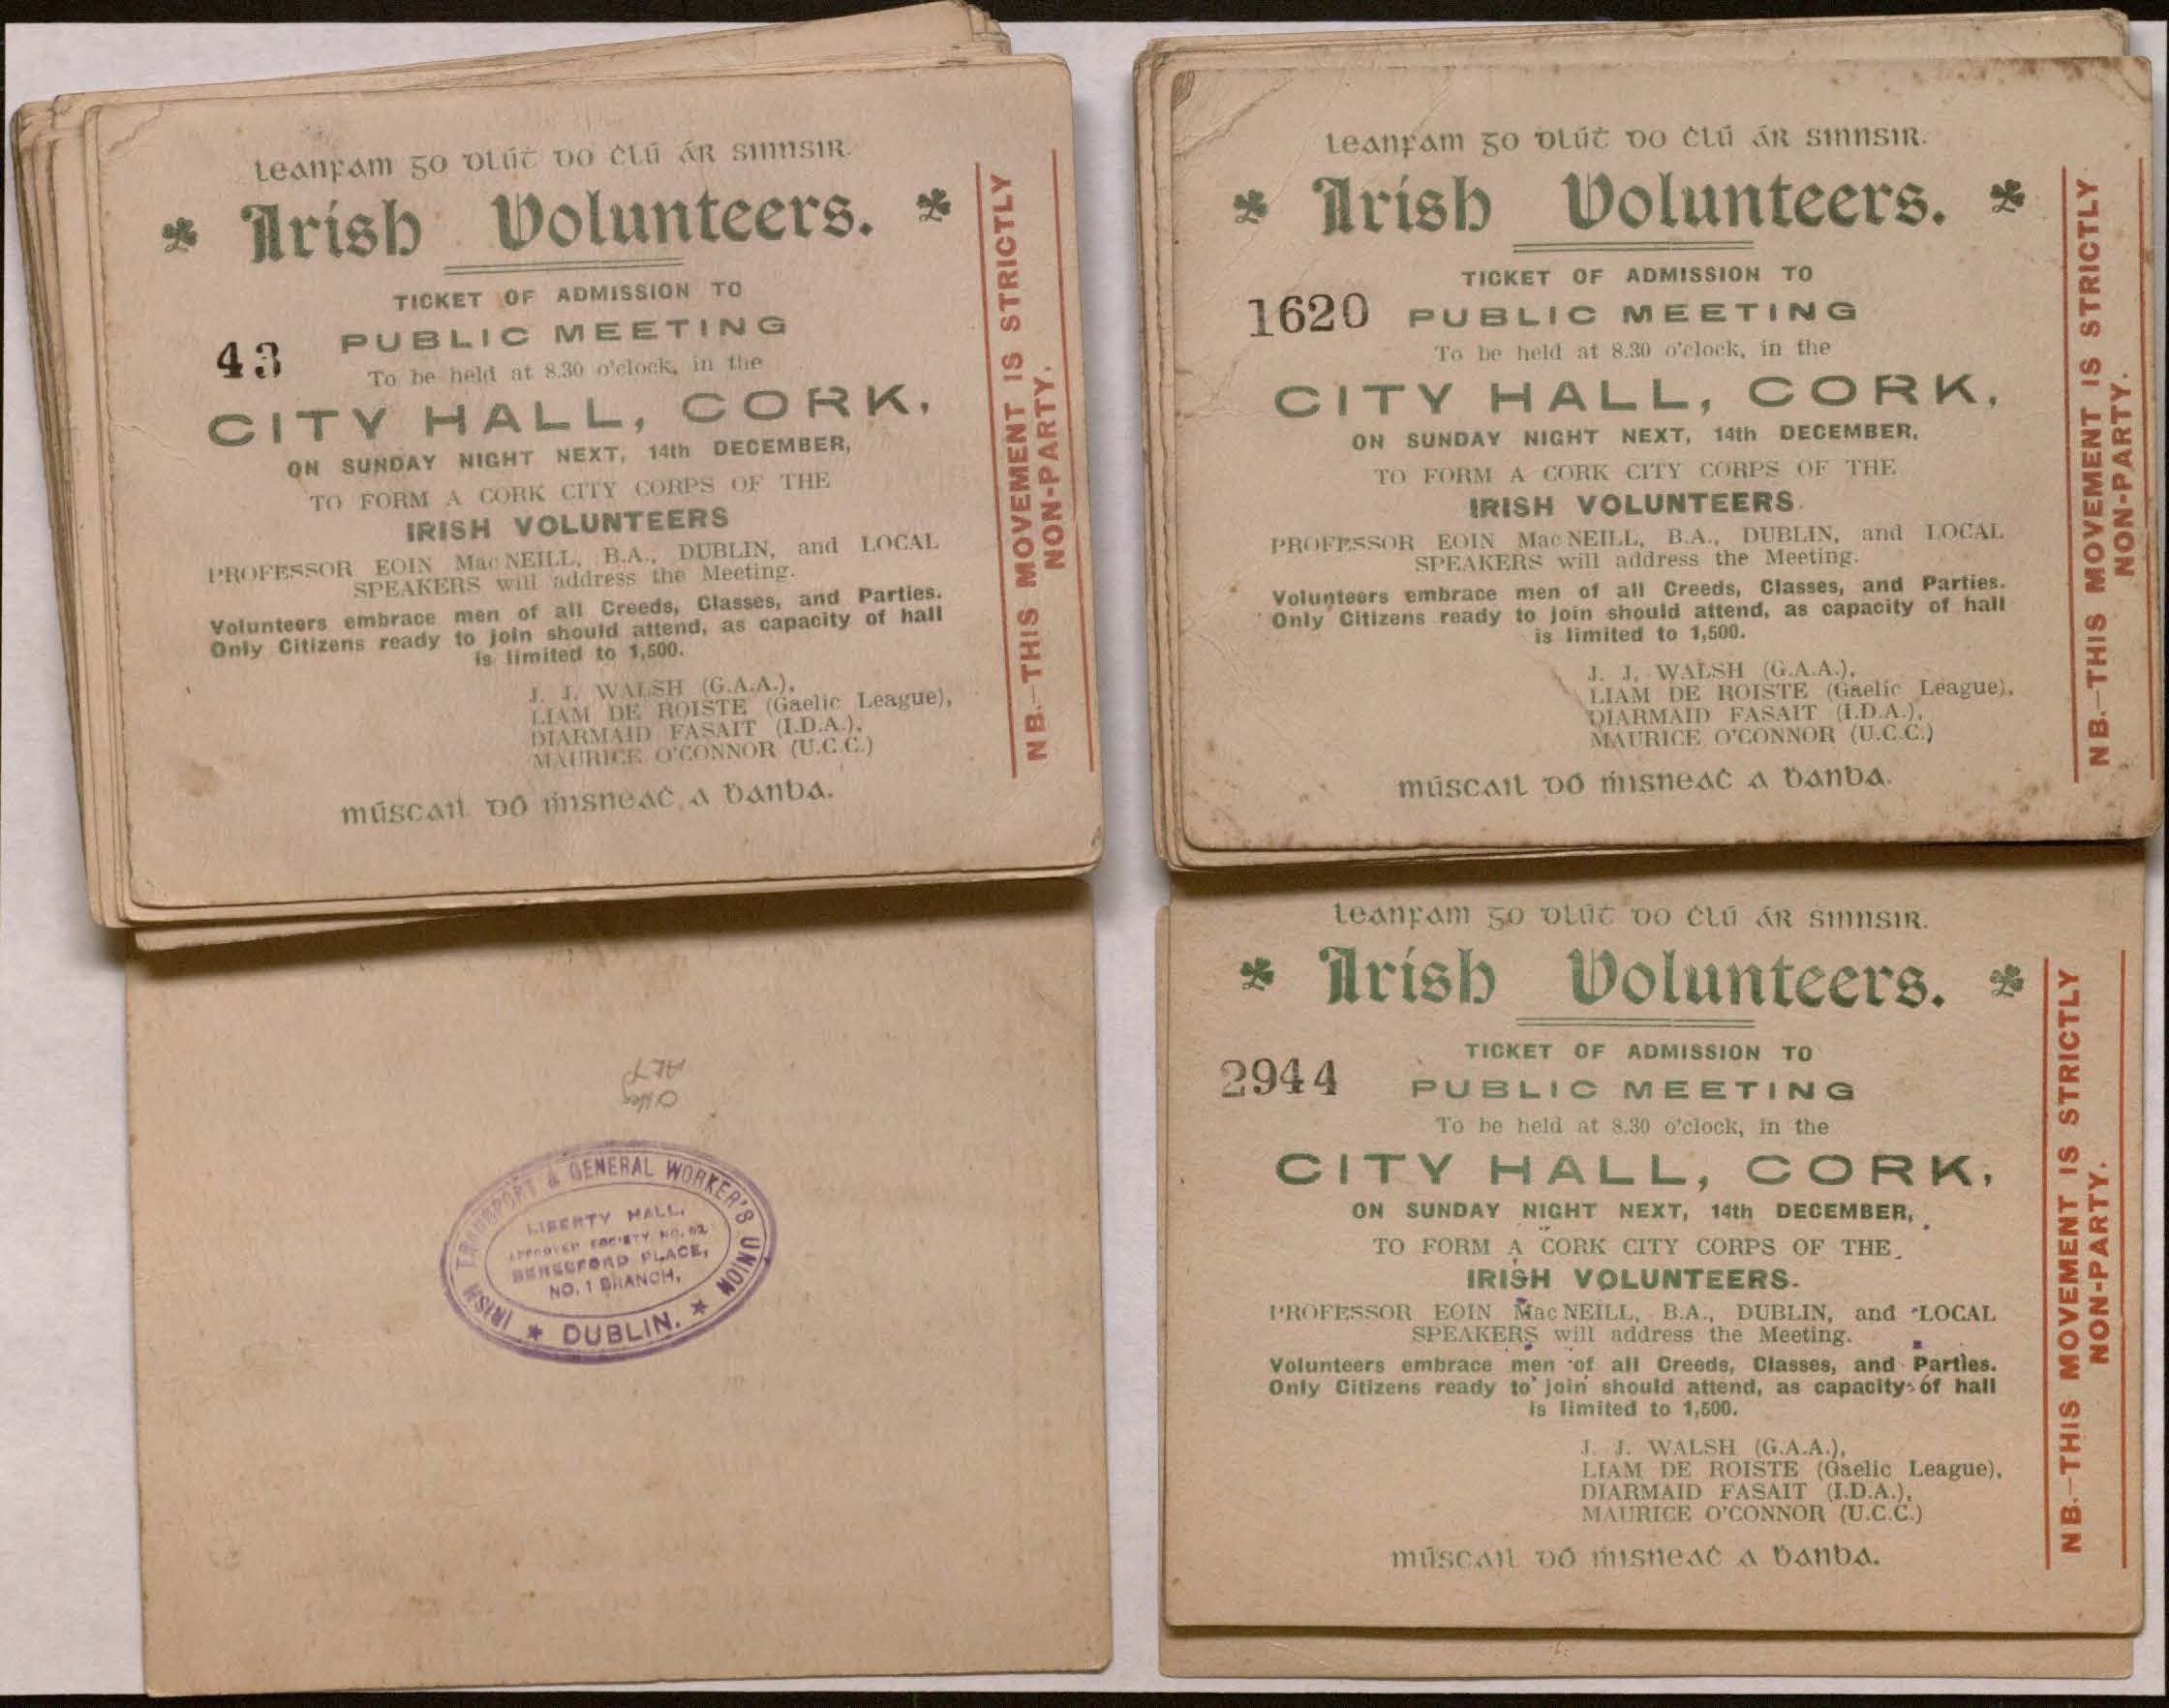 Image of a set of tickets to an Irish Volunteers public meeting, December 14 (1913), City Hall, Cork.